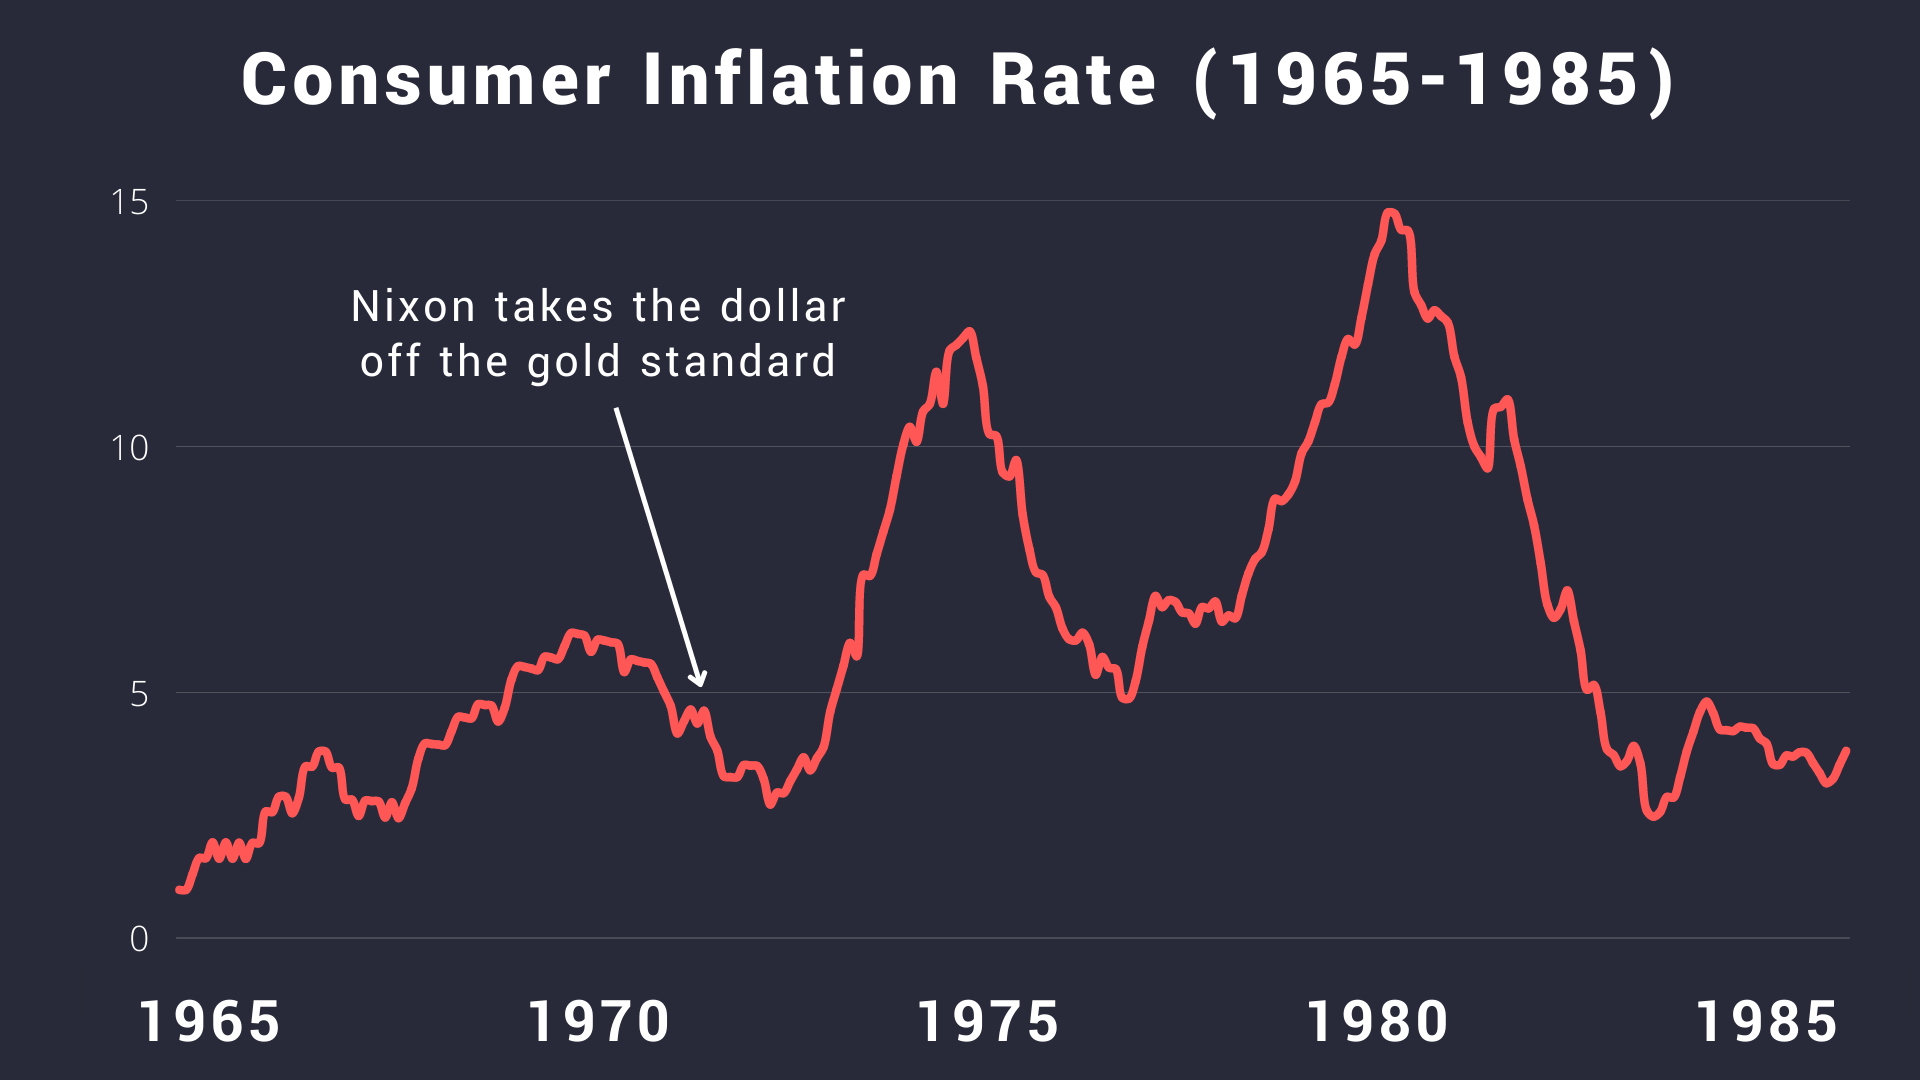 Graph of the consumer inflation rate during the Great Inflation of the 1970s